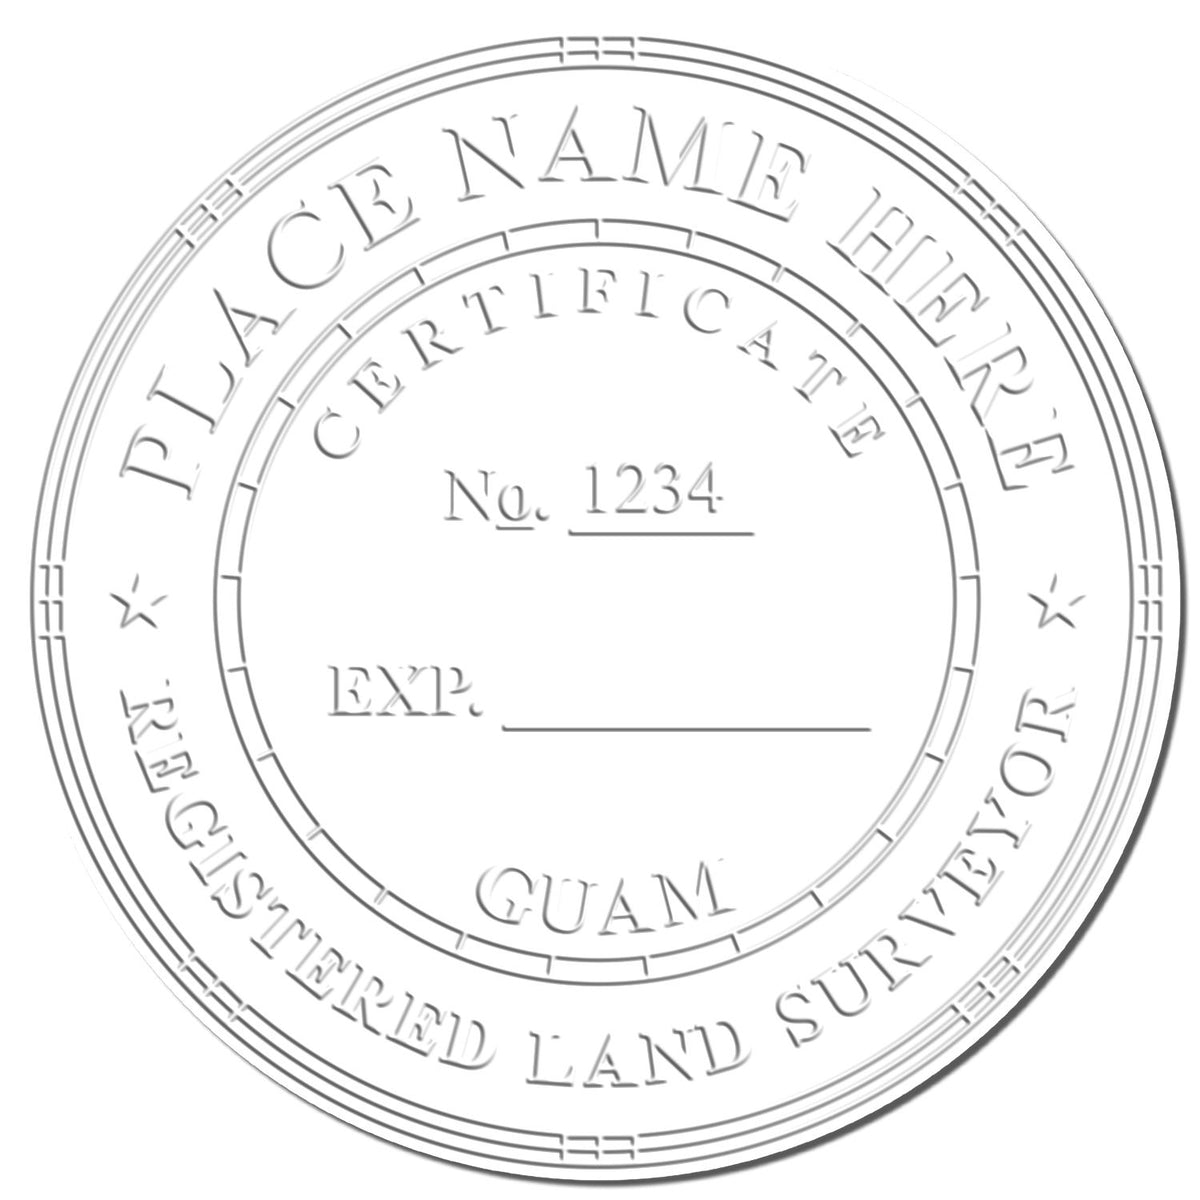 This paper is stamped with a sample imprint of the Heavy Duty Cast Iron Guam Land Surveyor Seal Embosser, signifying its quality and reliability.